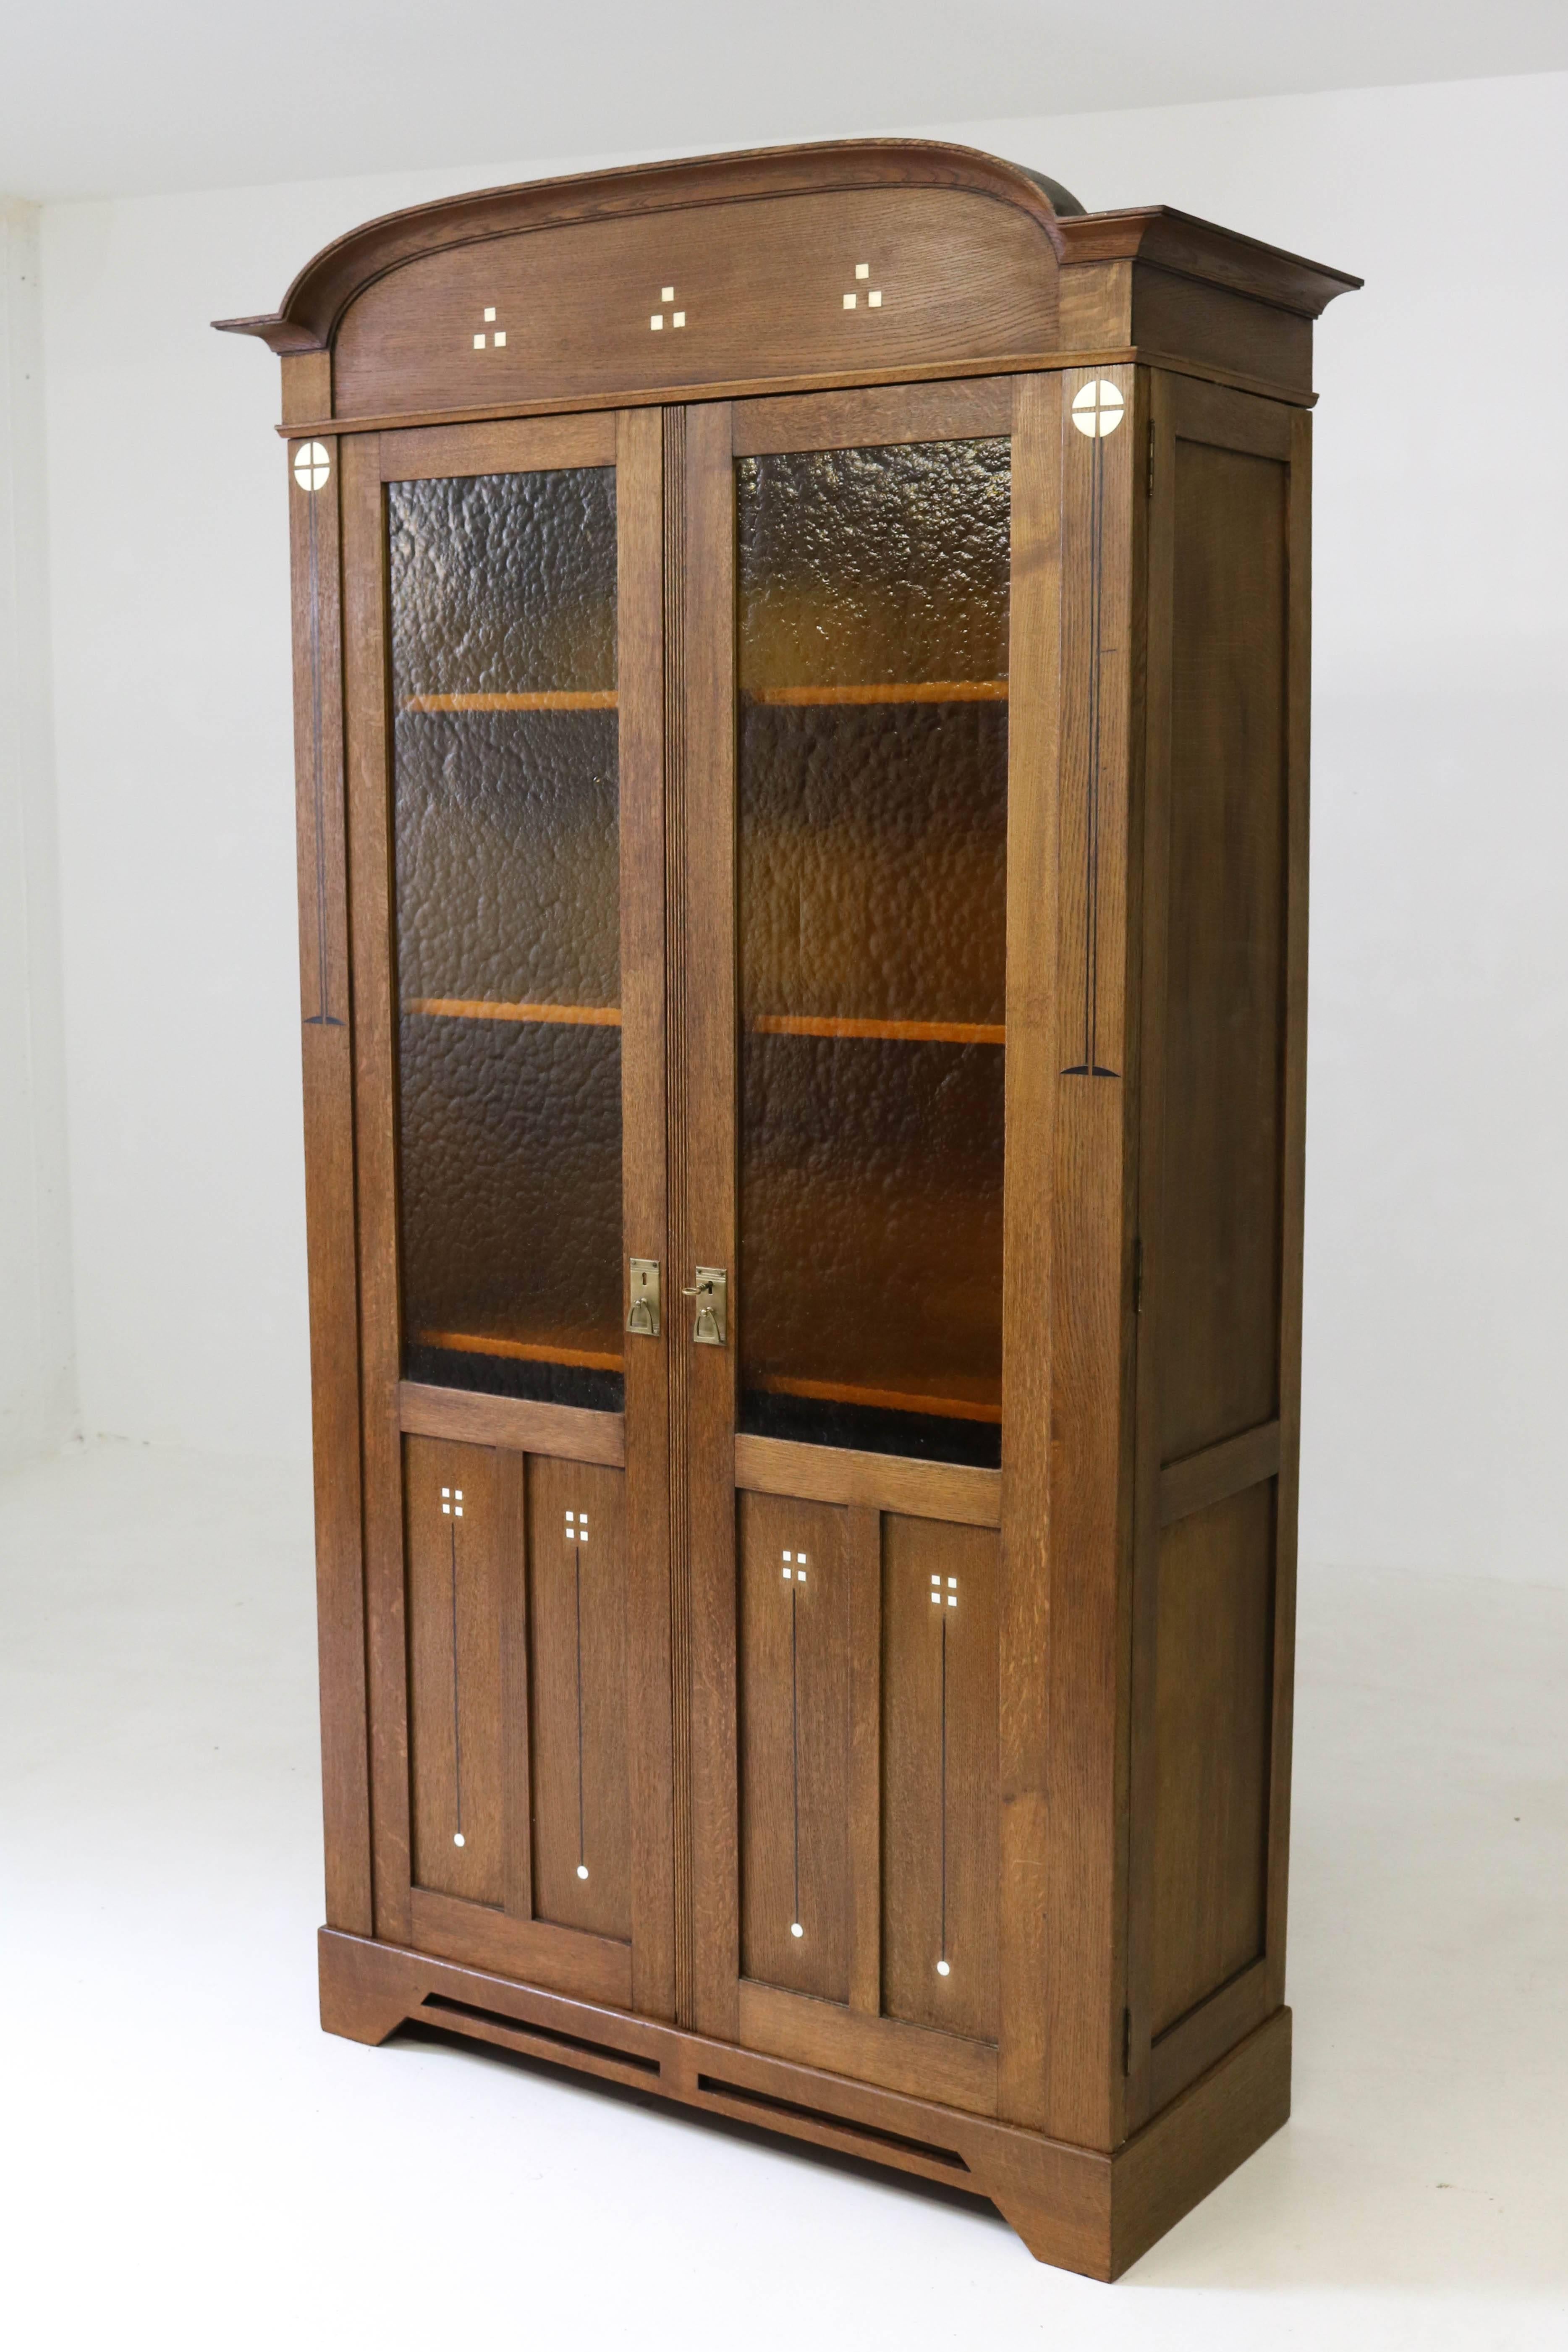 Stunning Dutch Art Nouveau bookcase, 1900s
Solid oak with impressive inlay.
In the style of Chris Wegerif.
The doors have original brown glass.
Four original solid oak adjustable shelves.
Bookcase can be dismantled for transport.
In good